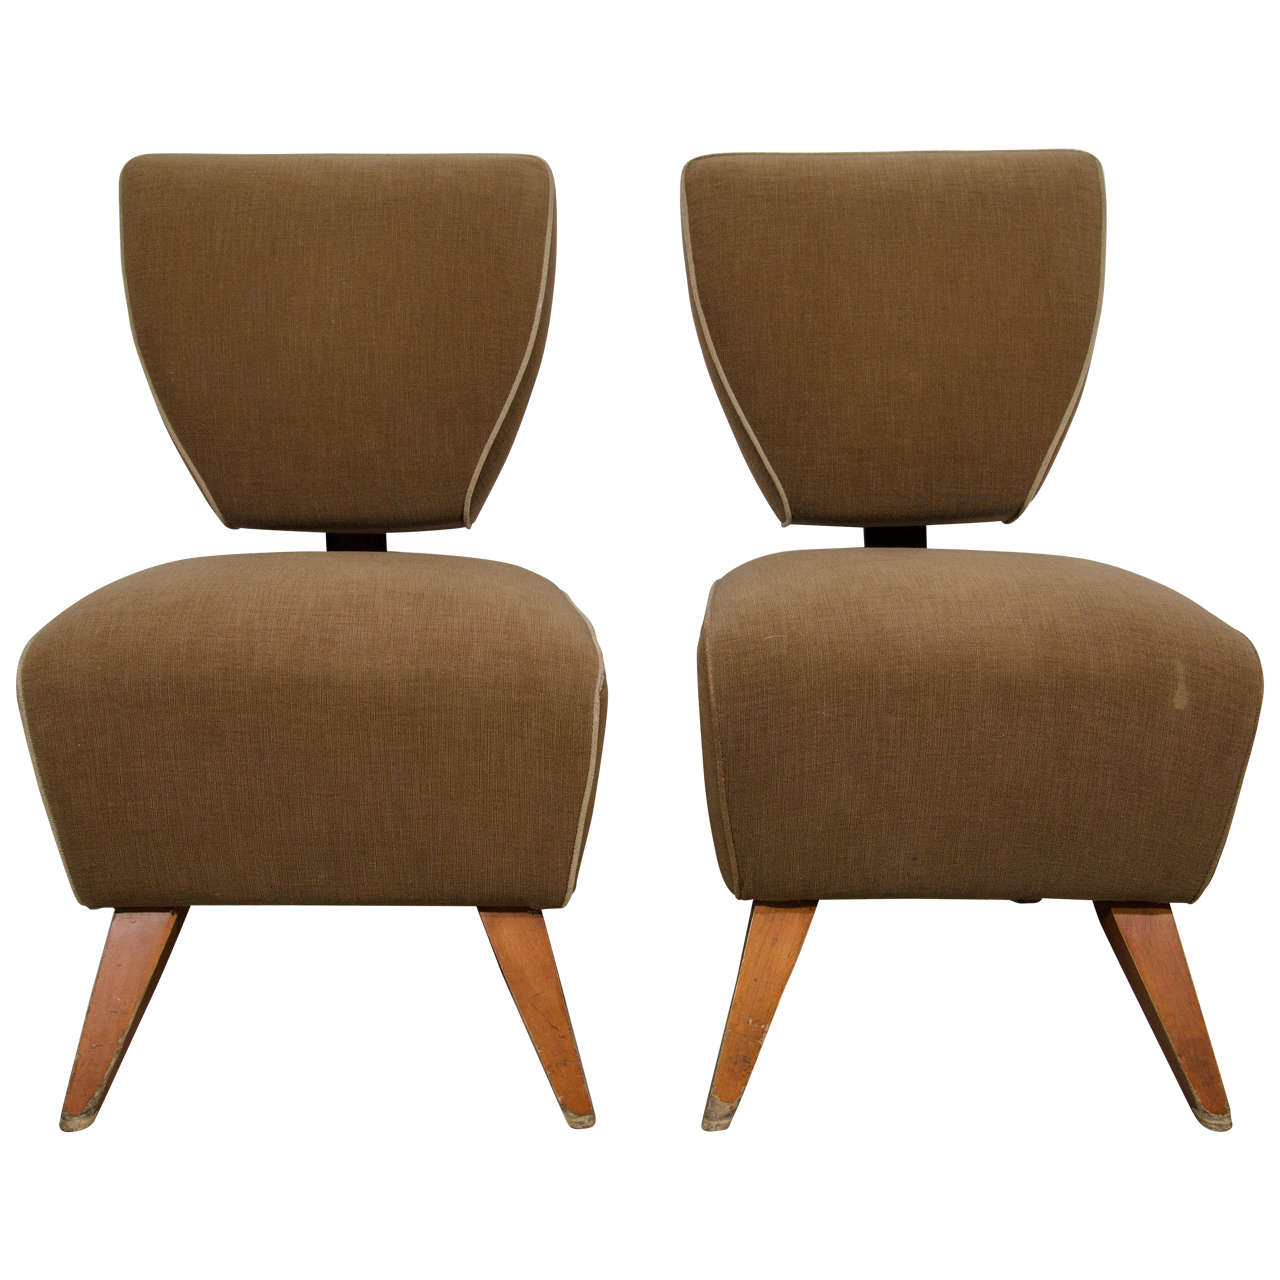 Jordan Mozer Studios Barney's "Fred's" Dining Chairs For Sale